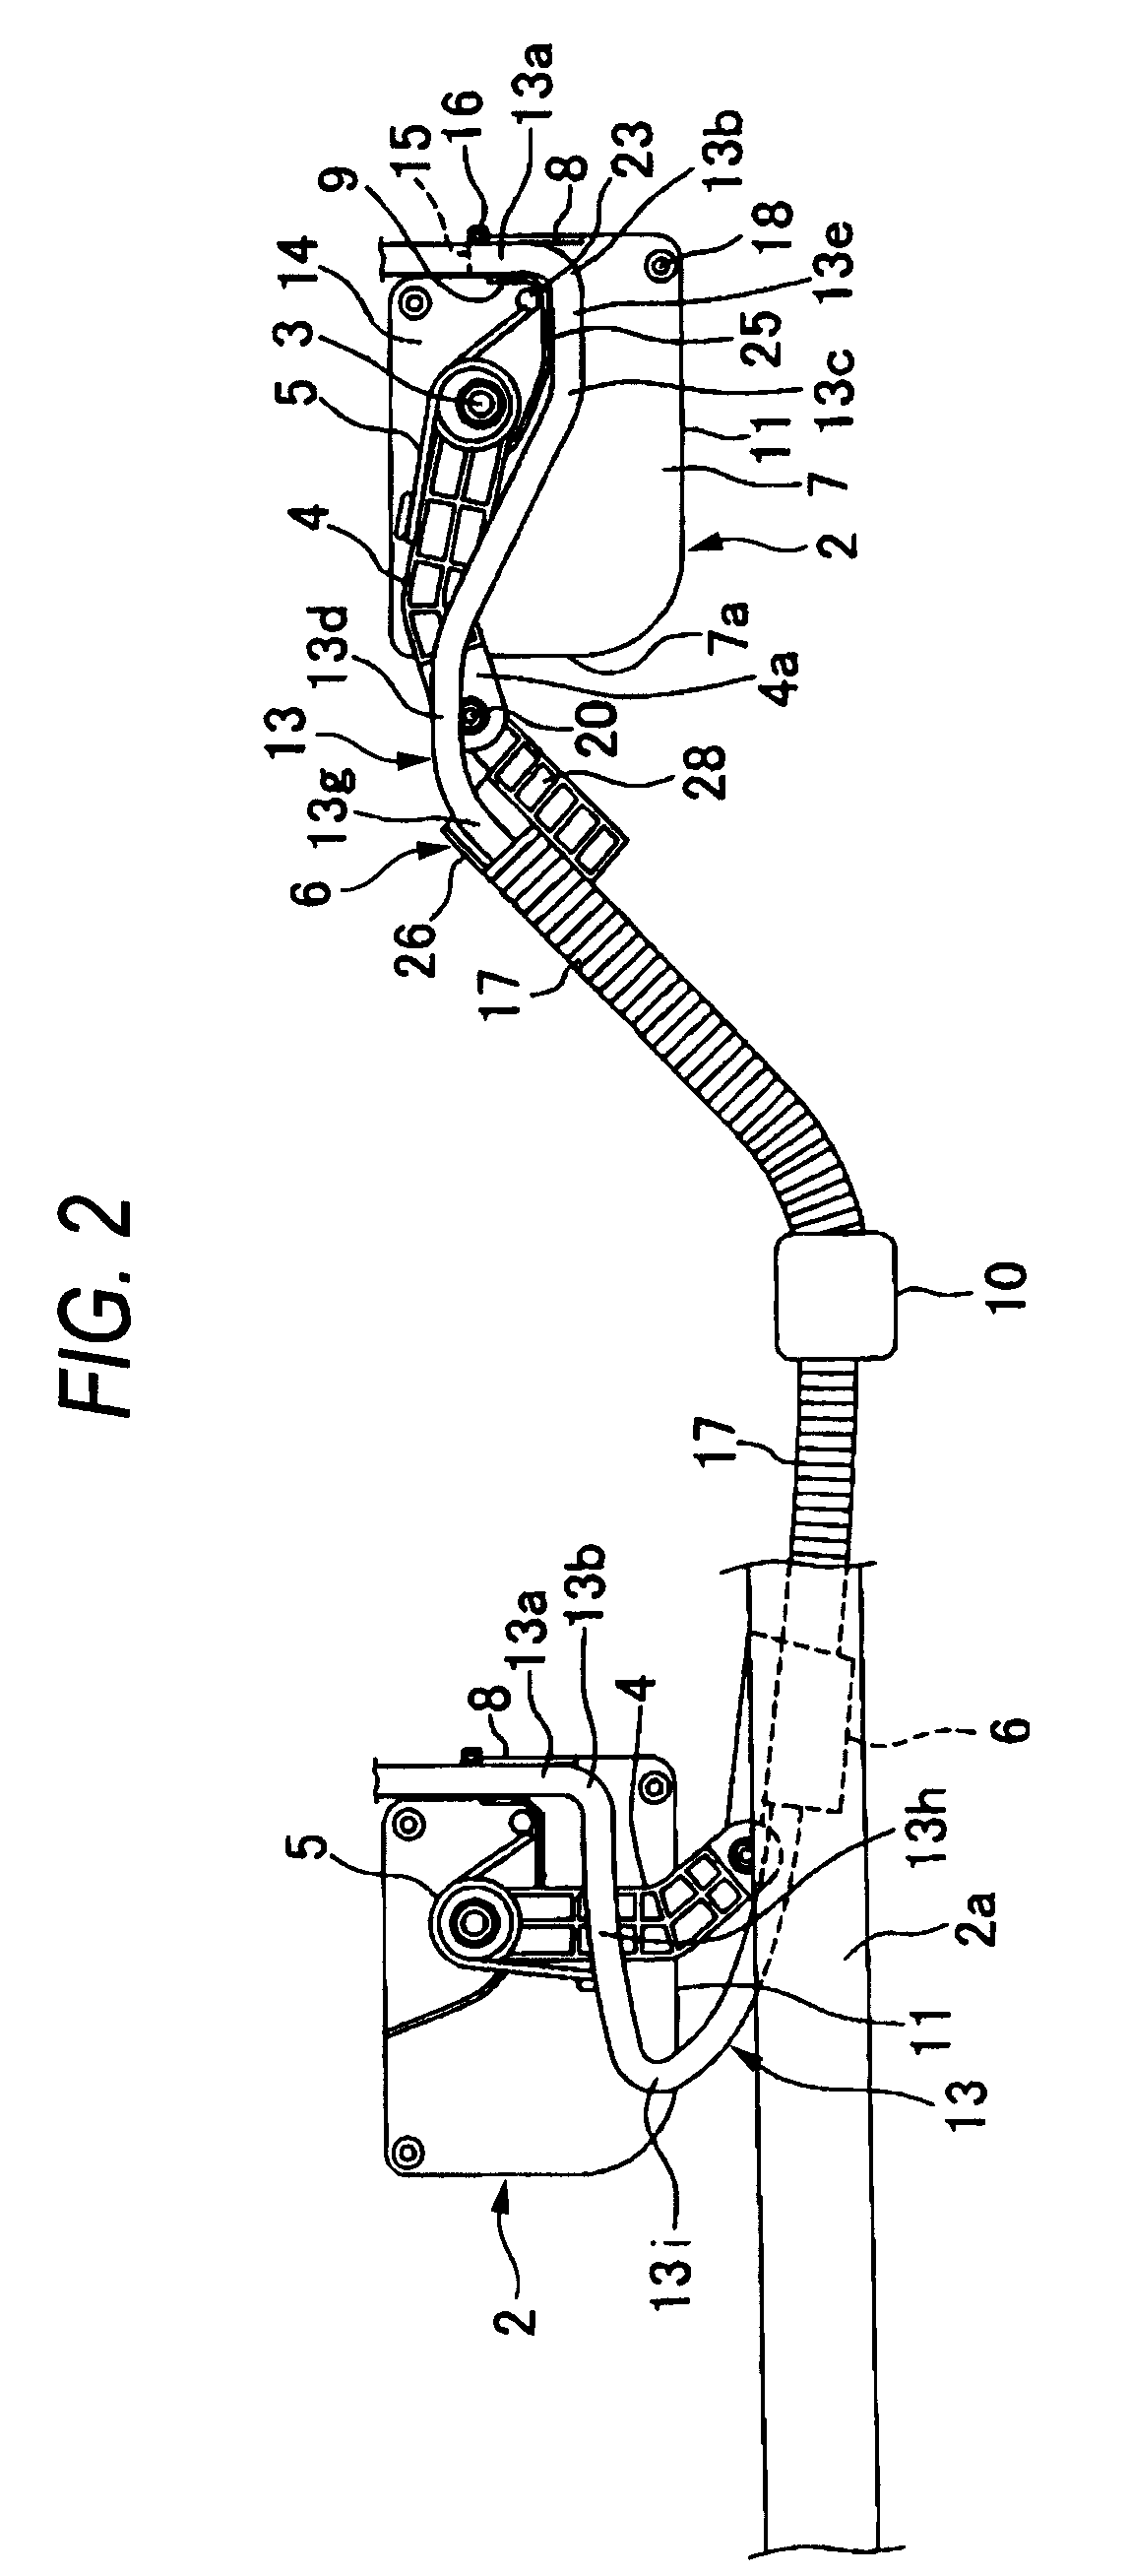 Feeding structure for sliding structural body